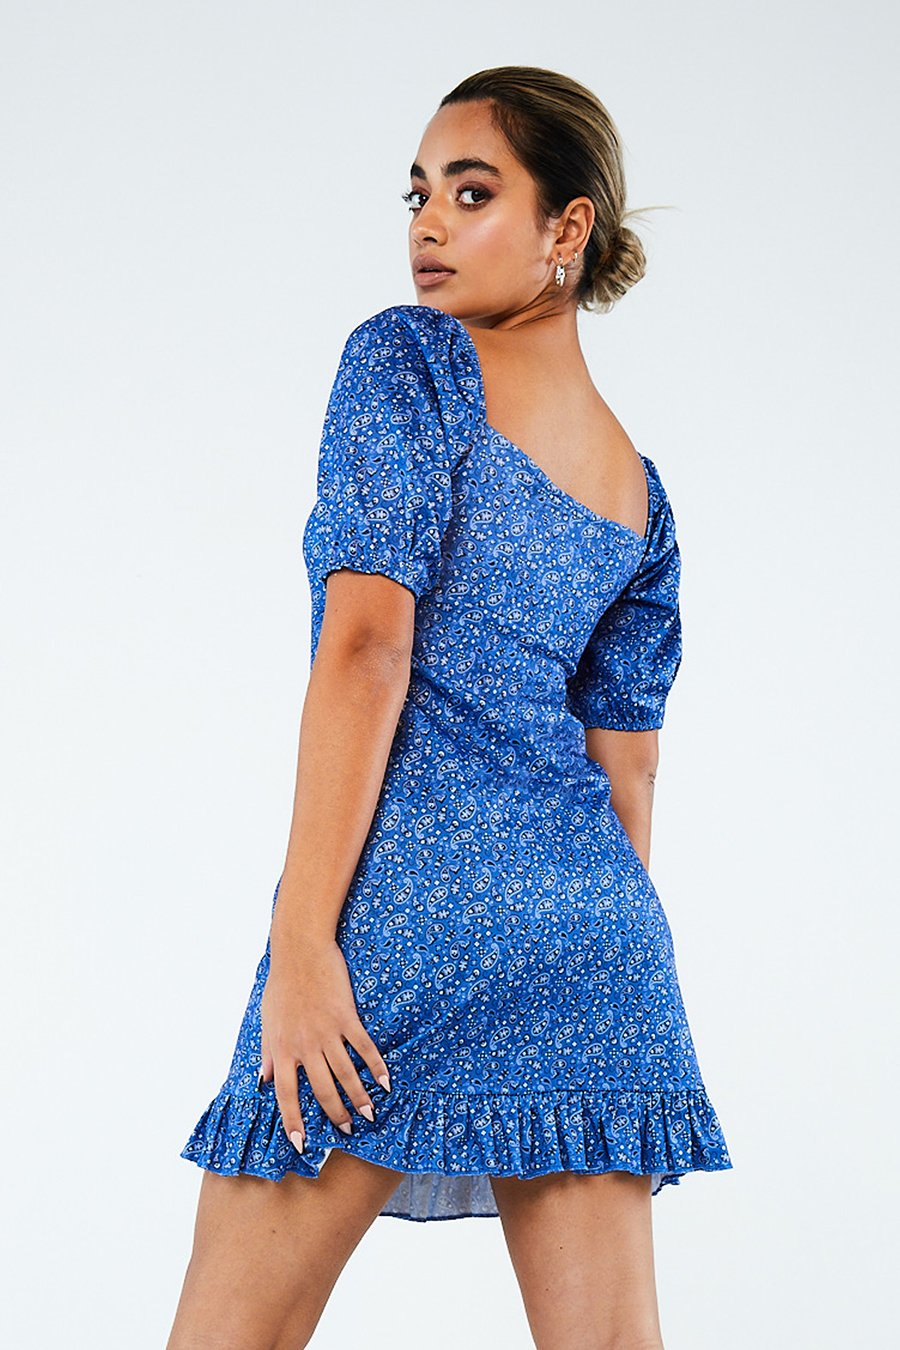 PAISLEY PUFF DRESS - EXCLUSIVE Dresses from NGO - Just €17.50! SHOP NOW AT IAMINHATELOVE BOTH IN STORE FOR CYPRUS AND ONLINE WORLDWIDE @ IAMINHATELOVE.COM